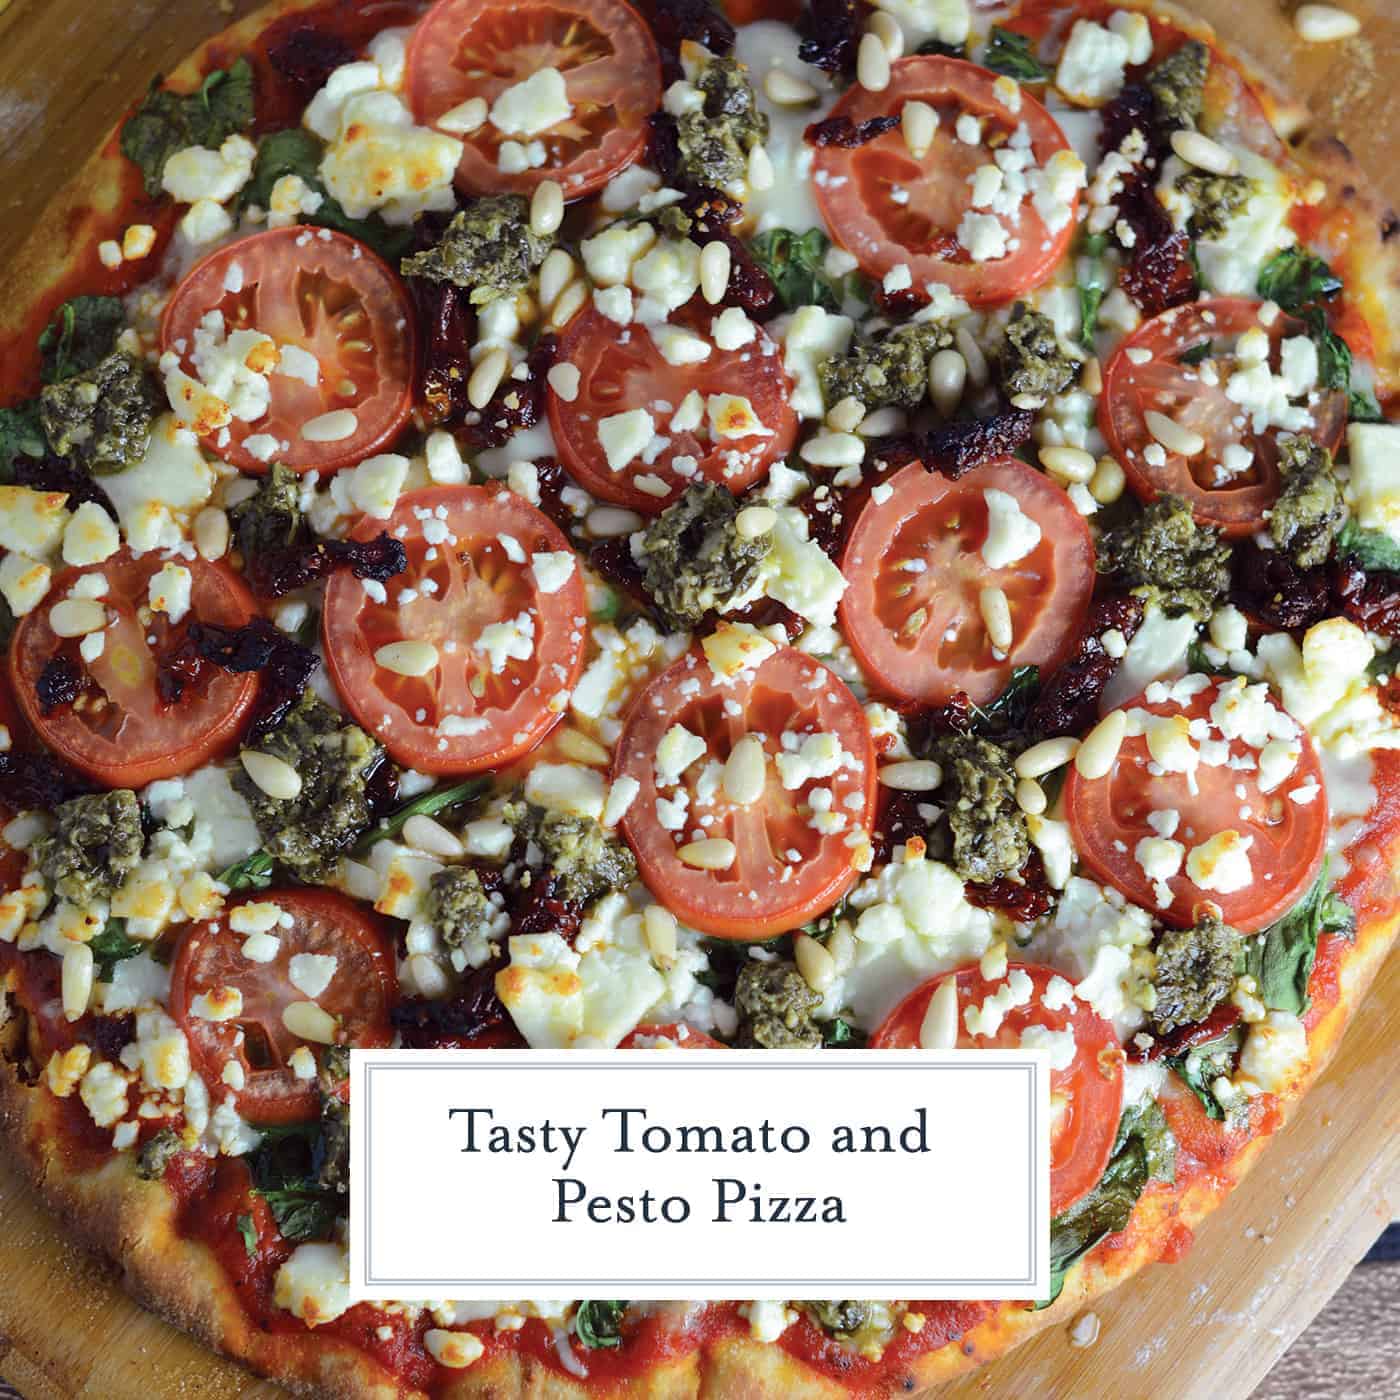 Tomato Pesto Pizza is an easy vegetarian pizza with fresh tomato slices, mozzarella and feta cheese, sun dried tomatoes, pesto and toasted pine nuts. #homemadepizza #pizzafromscratch #pestopizza www.savoryexperiments.com 